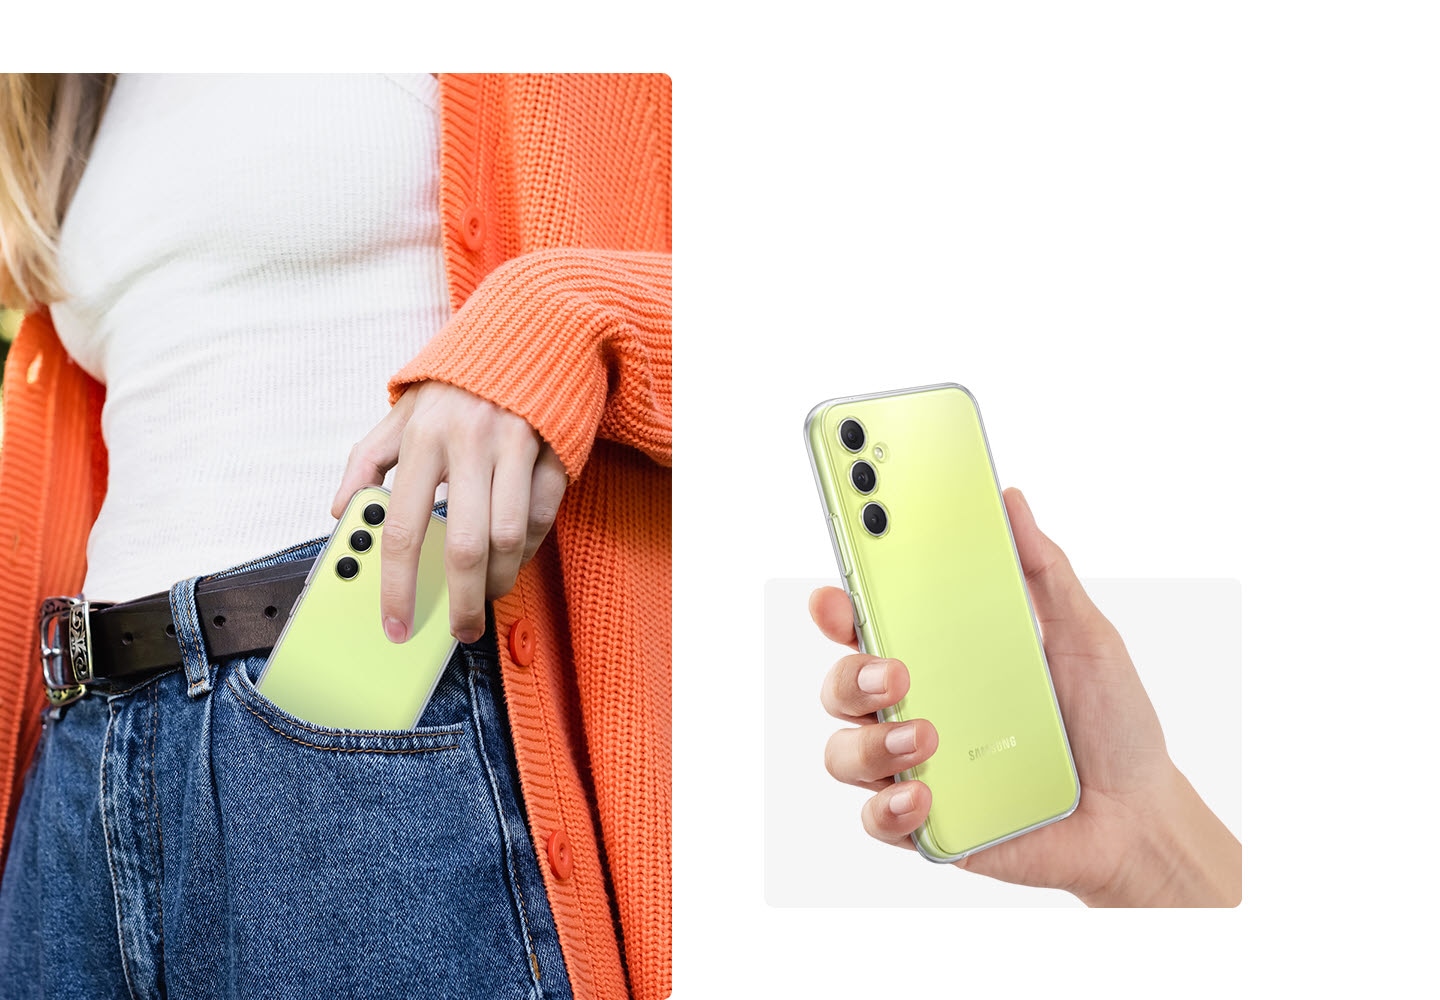 A woman slides her lime Galaxy device wearing a Clear Case inside her jean pocket. A hand holds up a lime Galaxy device wearing a Clear Case to show the backside.